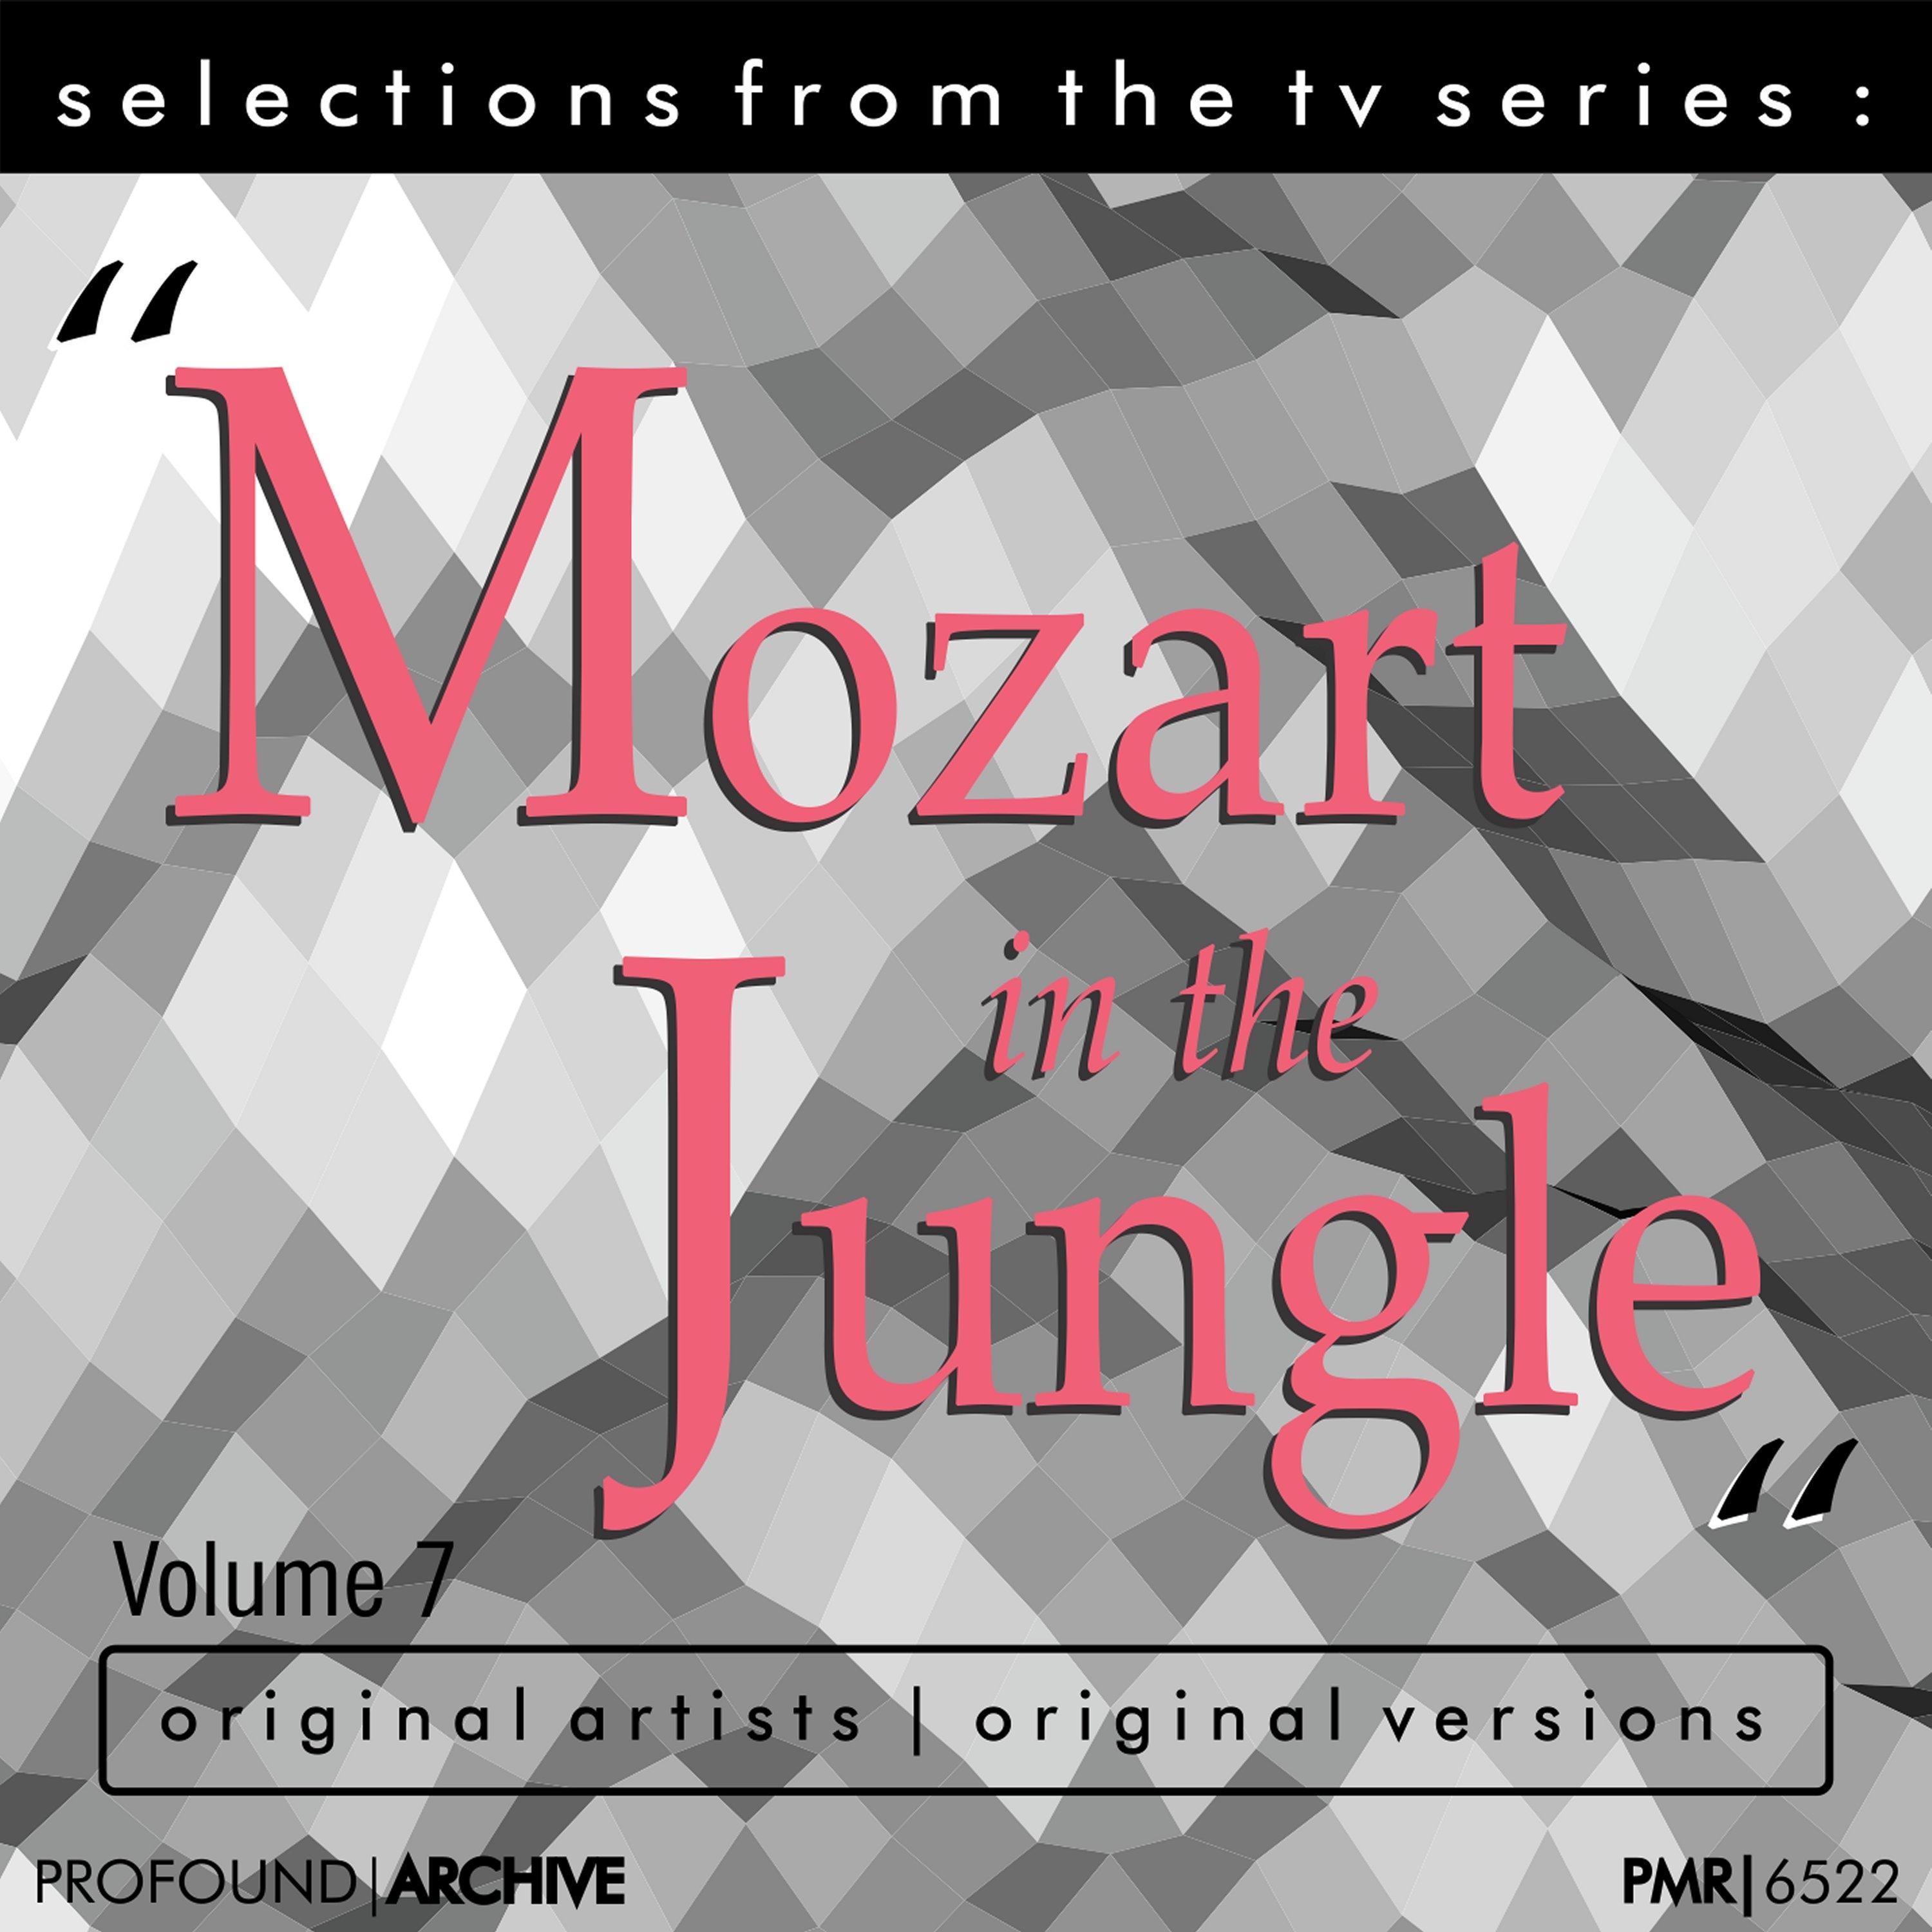 Selections from the TV Serie Mozart in the Jungle Volume 7